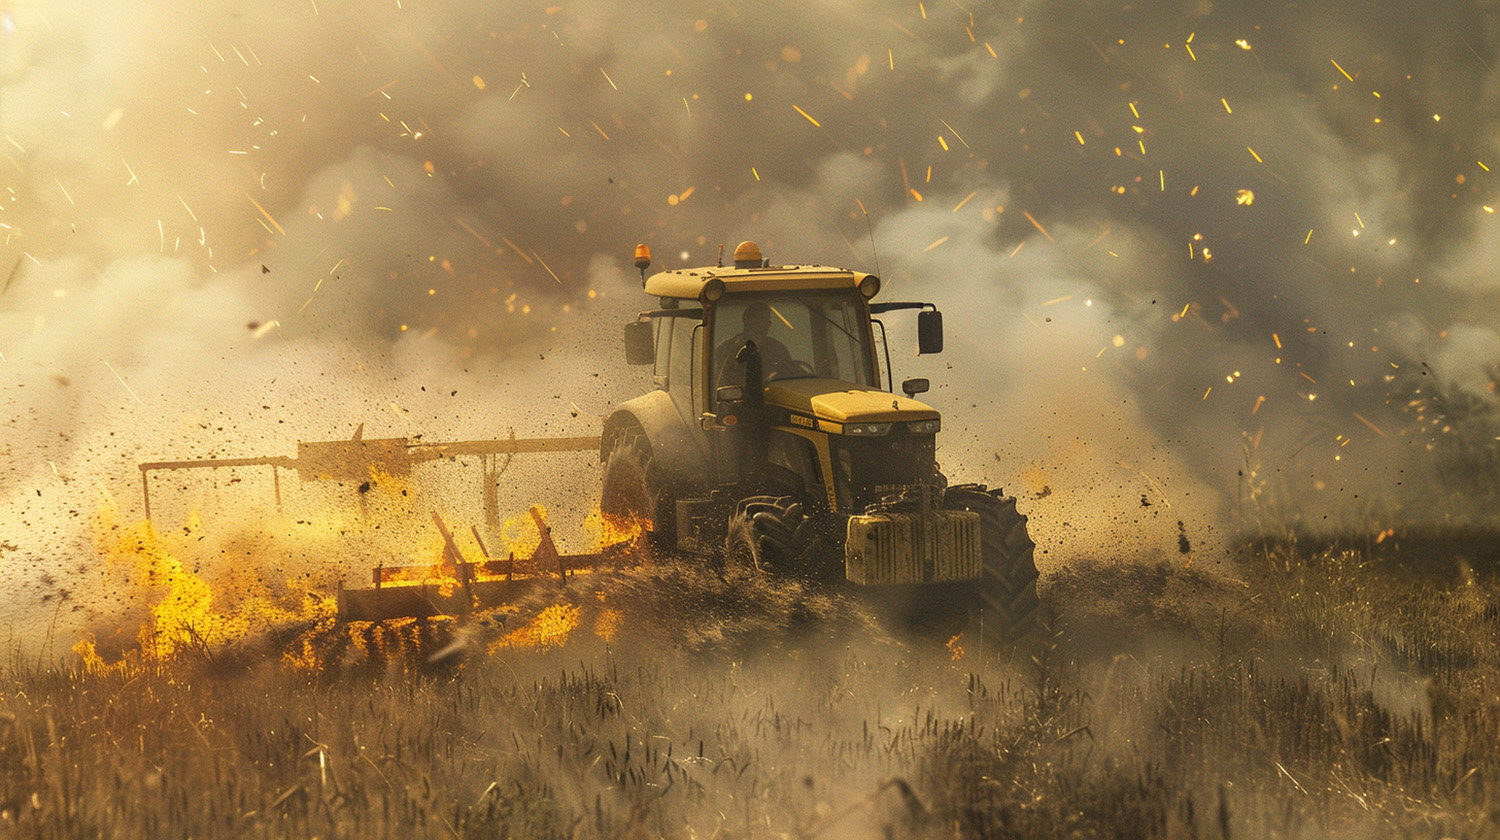 Ukraine'S Armored Tractors - A Tractor Drives Through A Burning Field, Surrounded By Smoke And Sparks, As Drones Buzz Overhead.